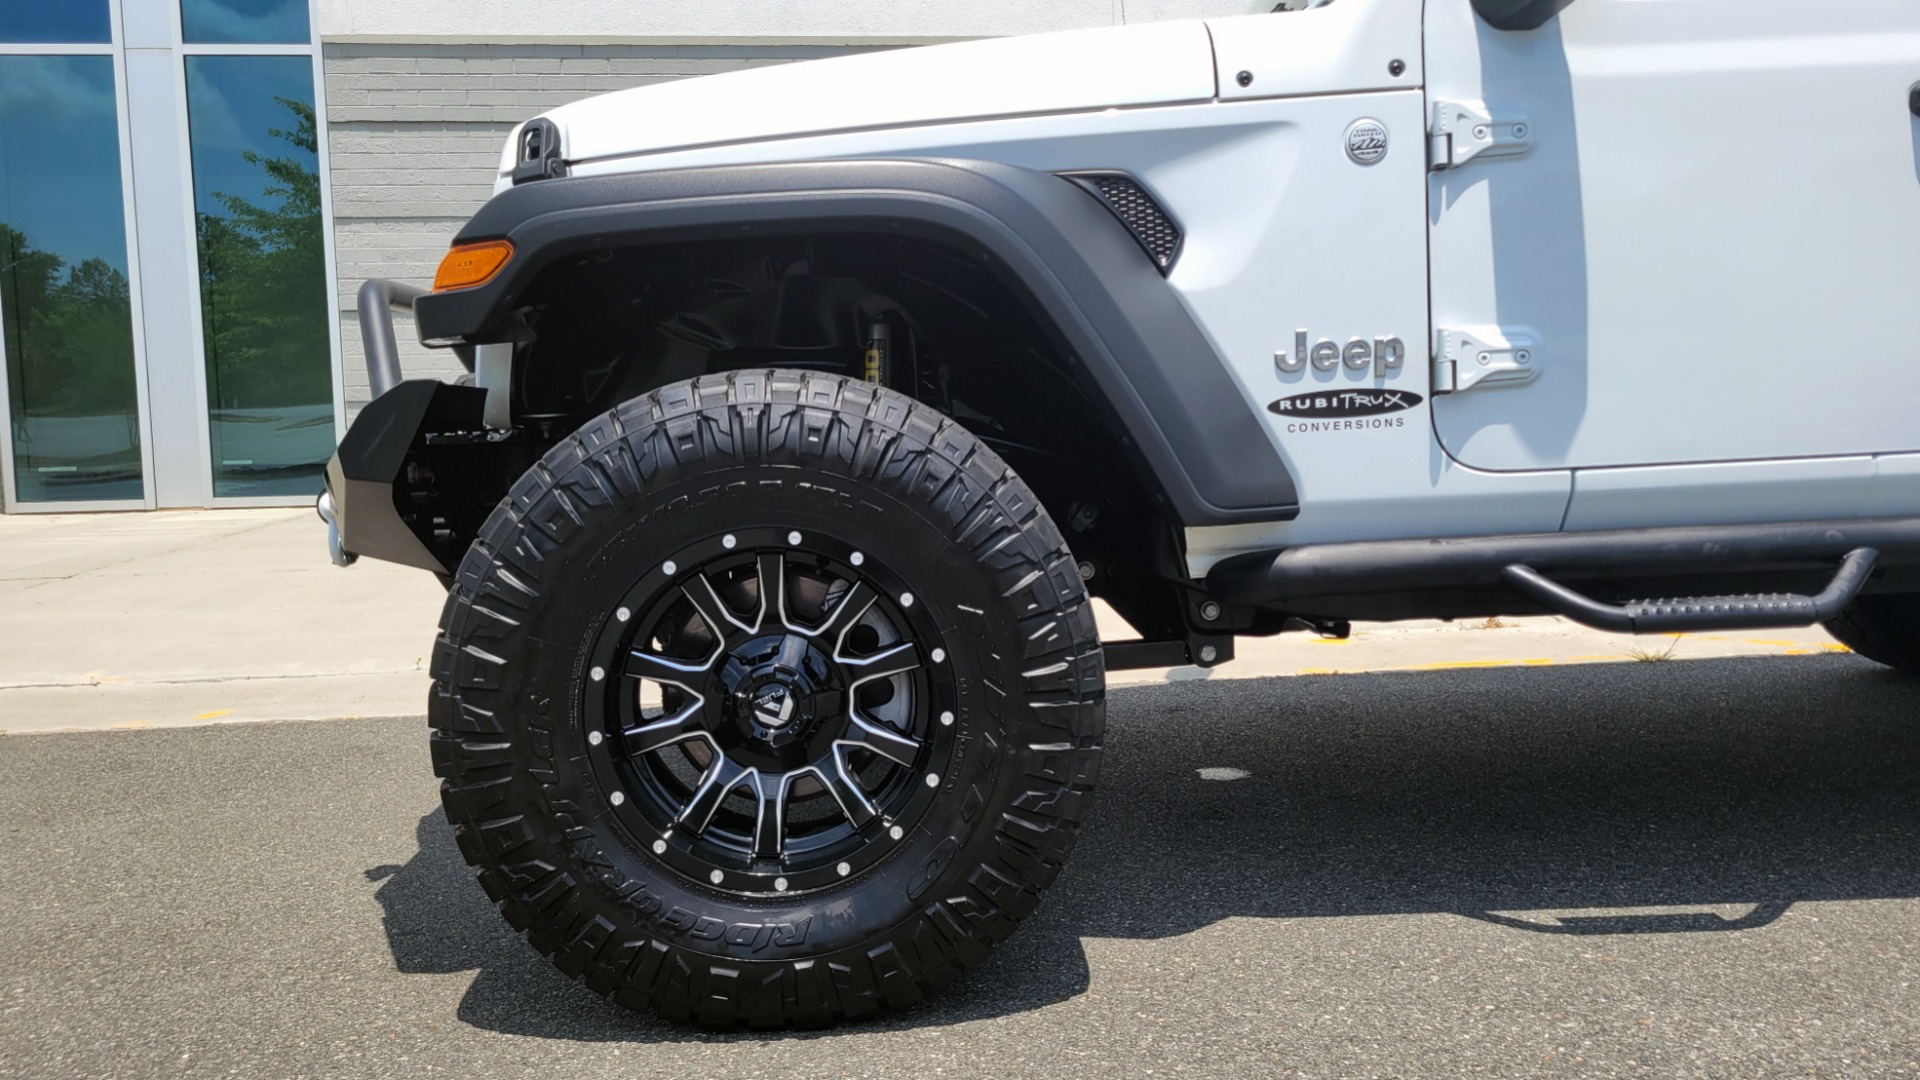 Used 2018 Jeep WRANGLER UNLIMITED SPORT RUBITRUX 4X4 / AUTO / CLOTH SEATS / SOFT-TOP / CAMERA for sale $46,500 at Formula Imports in Charlotte NC 28227 105